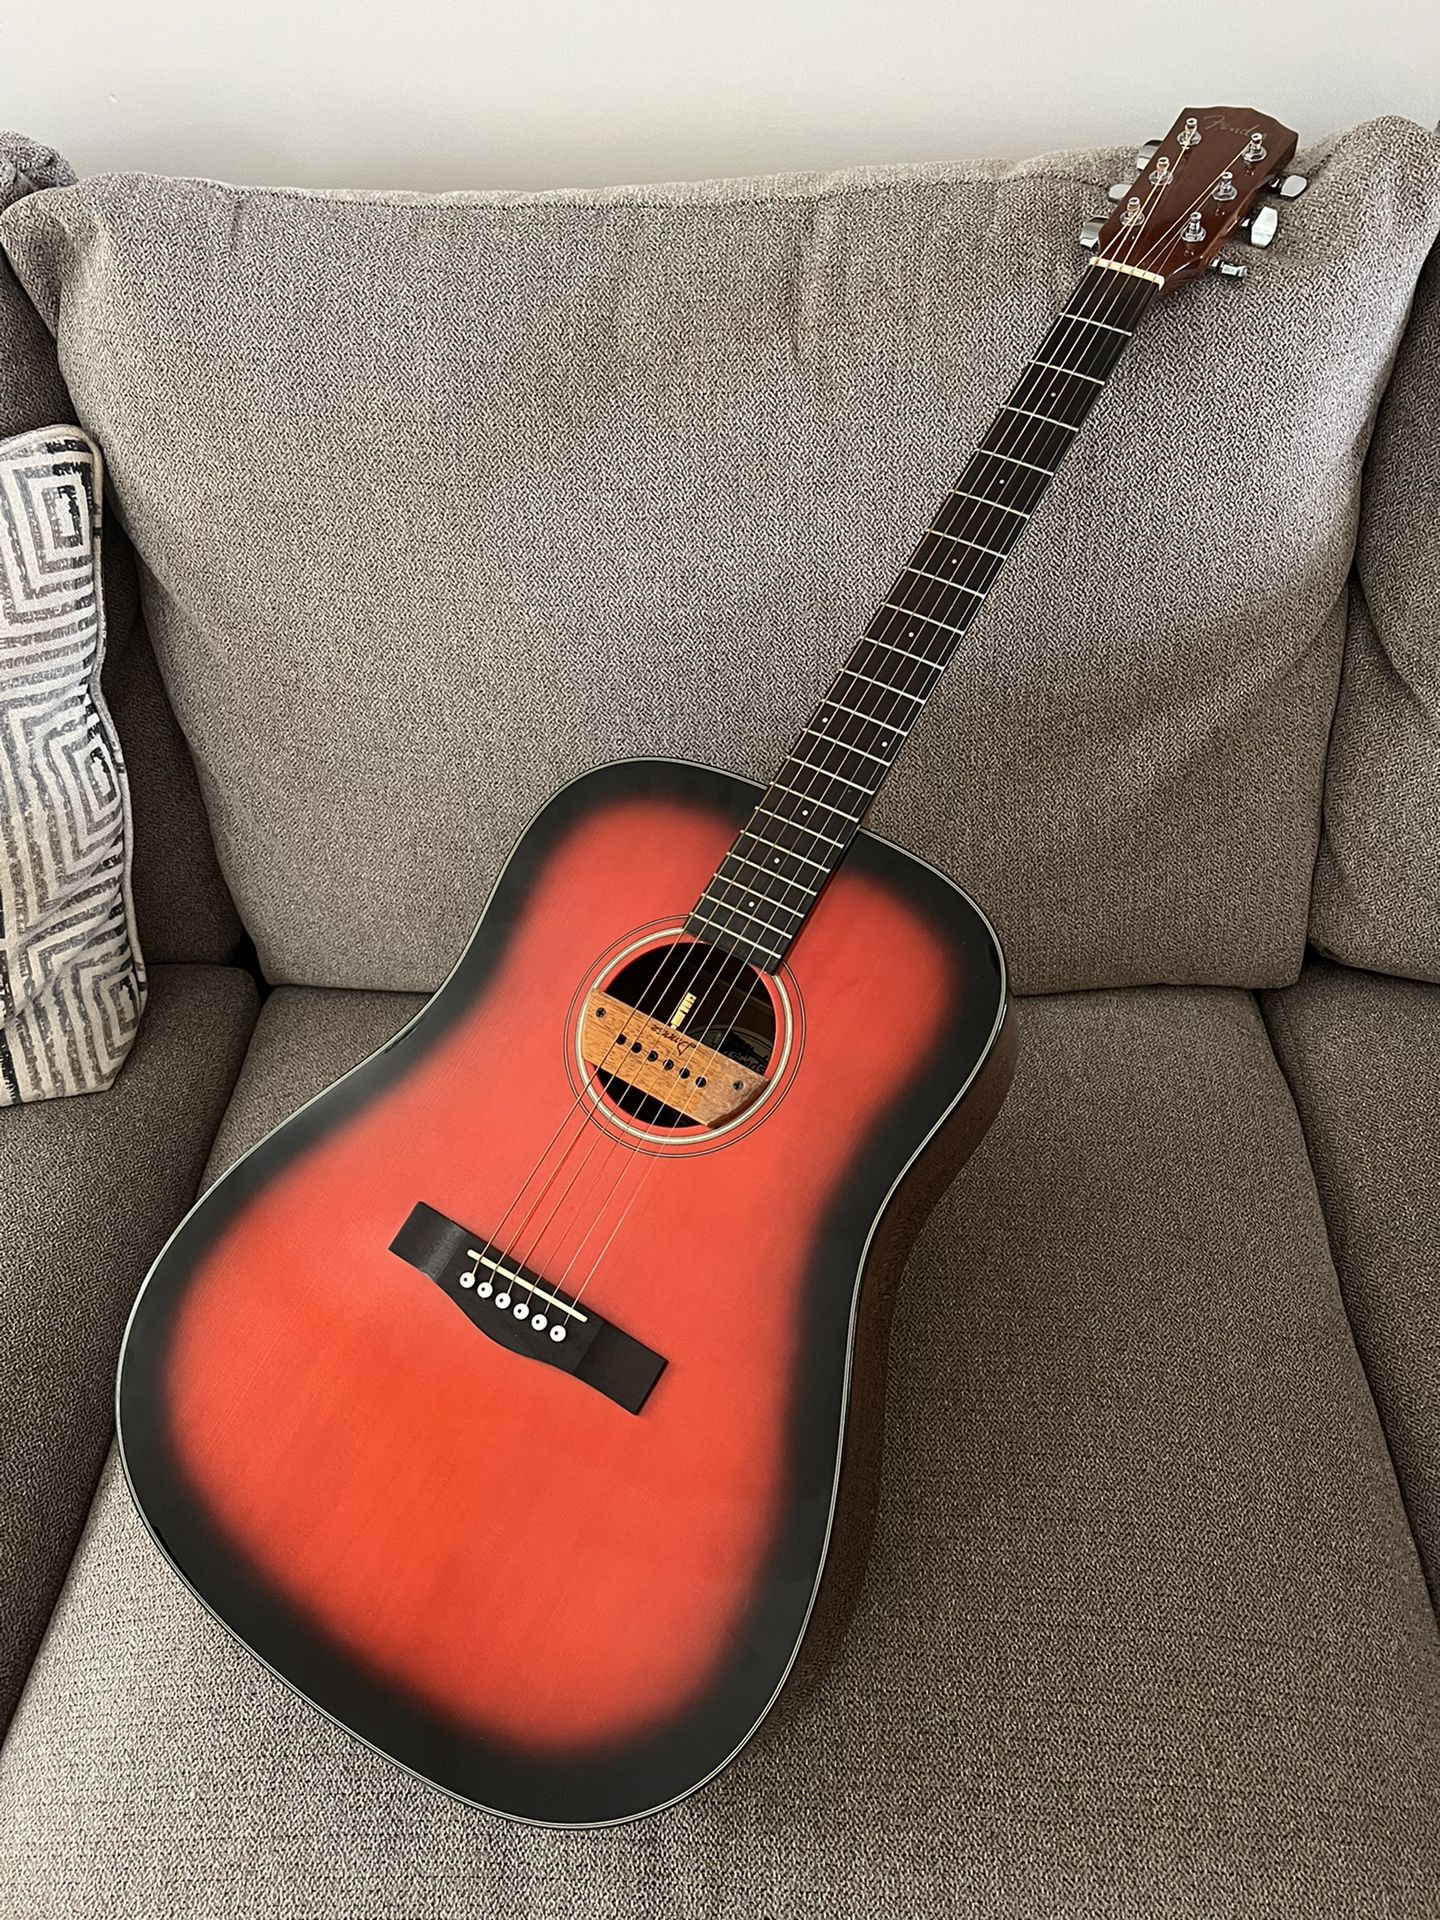 Acoustic Guitar With Pickups 